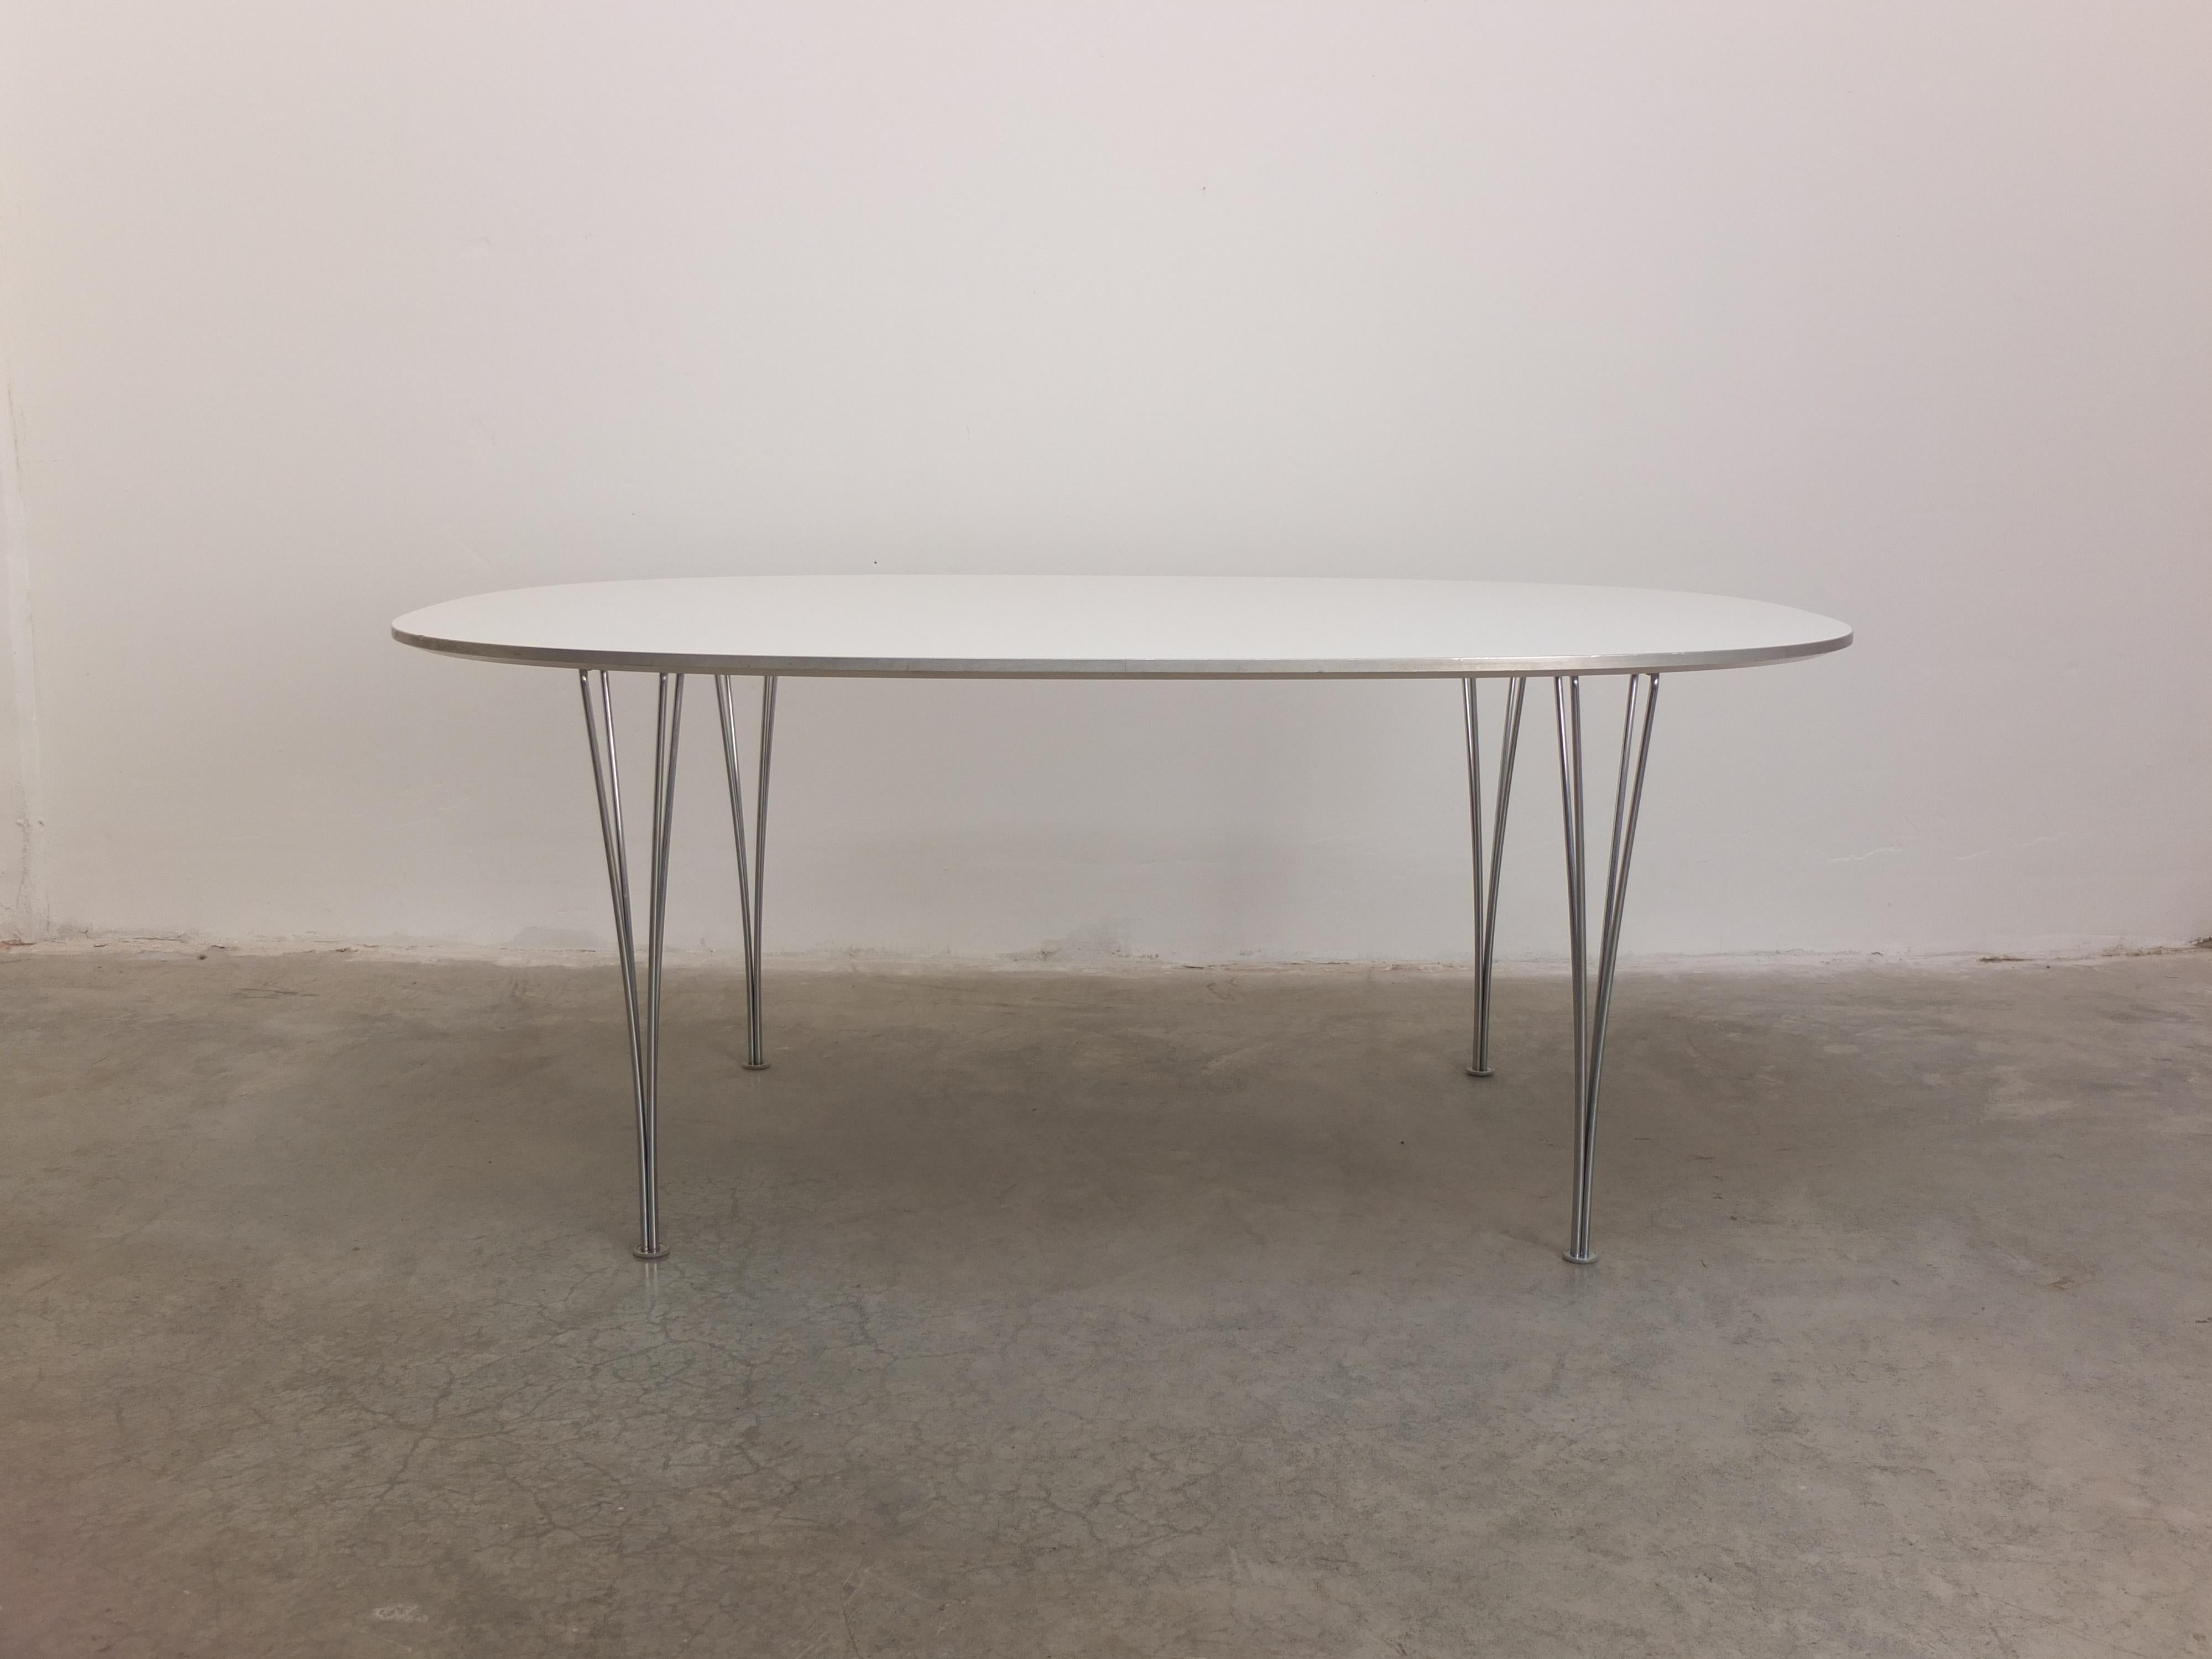 A ‘Super-Elliptical’ dining table designed by Piet Hein & Bruno Mathsson in 1968. This example features a white laminated top with an aluminum edge, combined with the signature chromed steel spanlegs. Produced by Fritz Hansen in 2005 (labeled). This